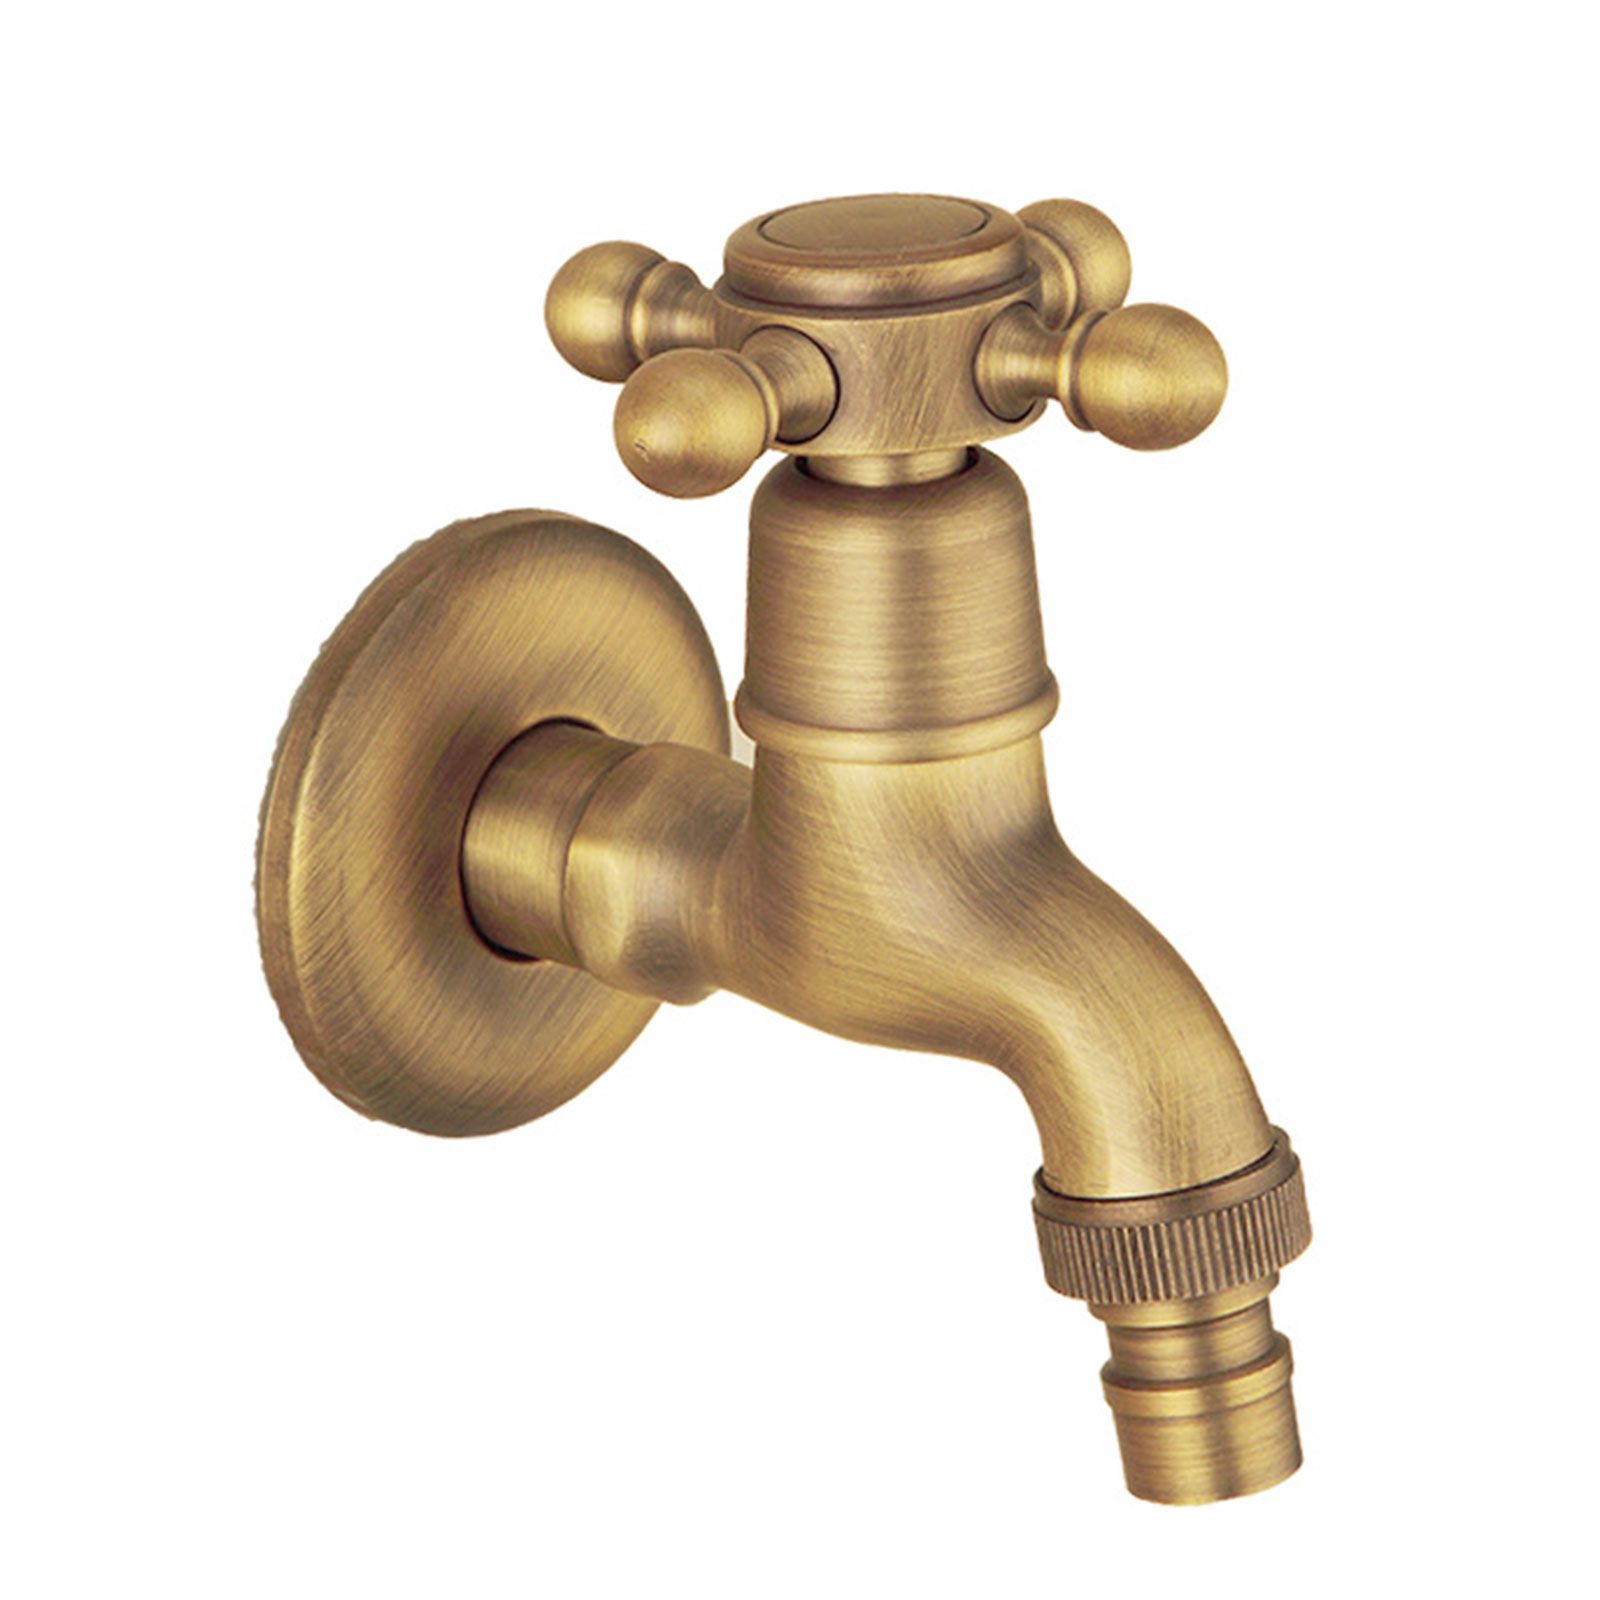 Decorative brass outdoor faucets